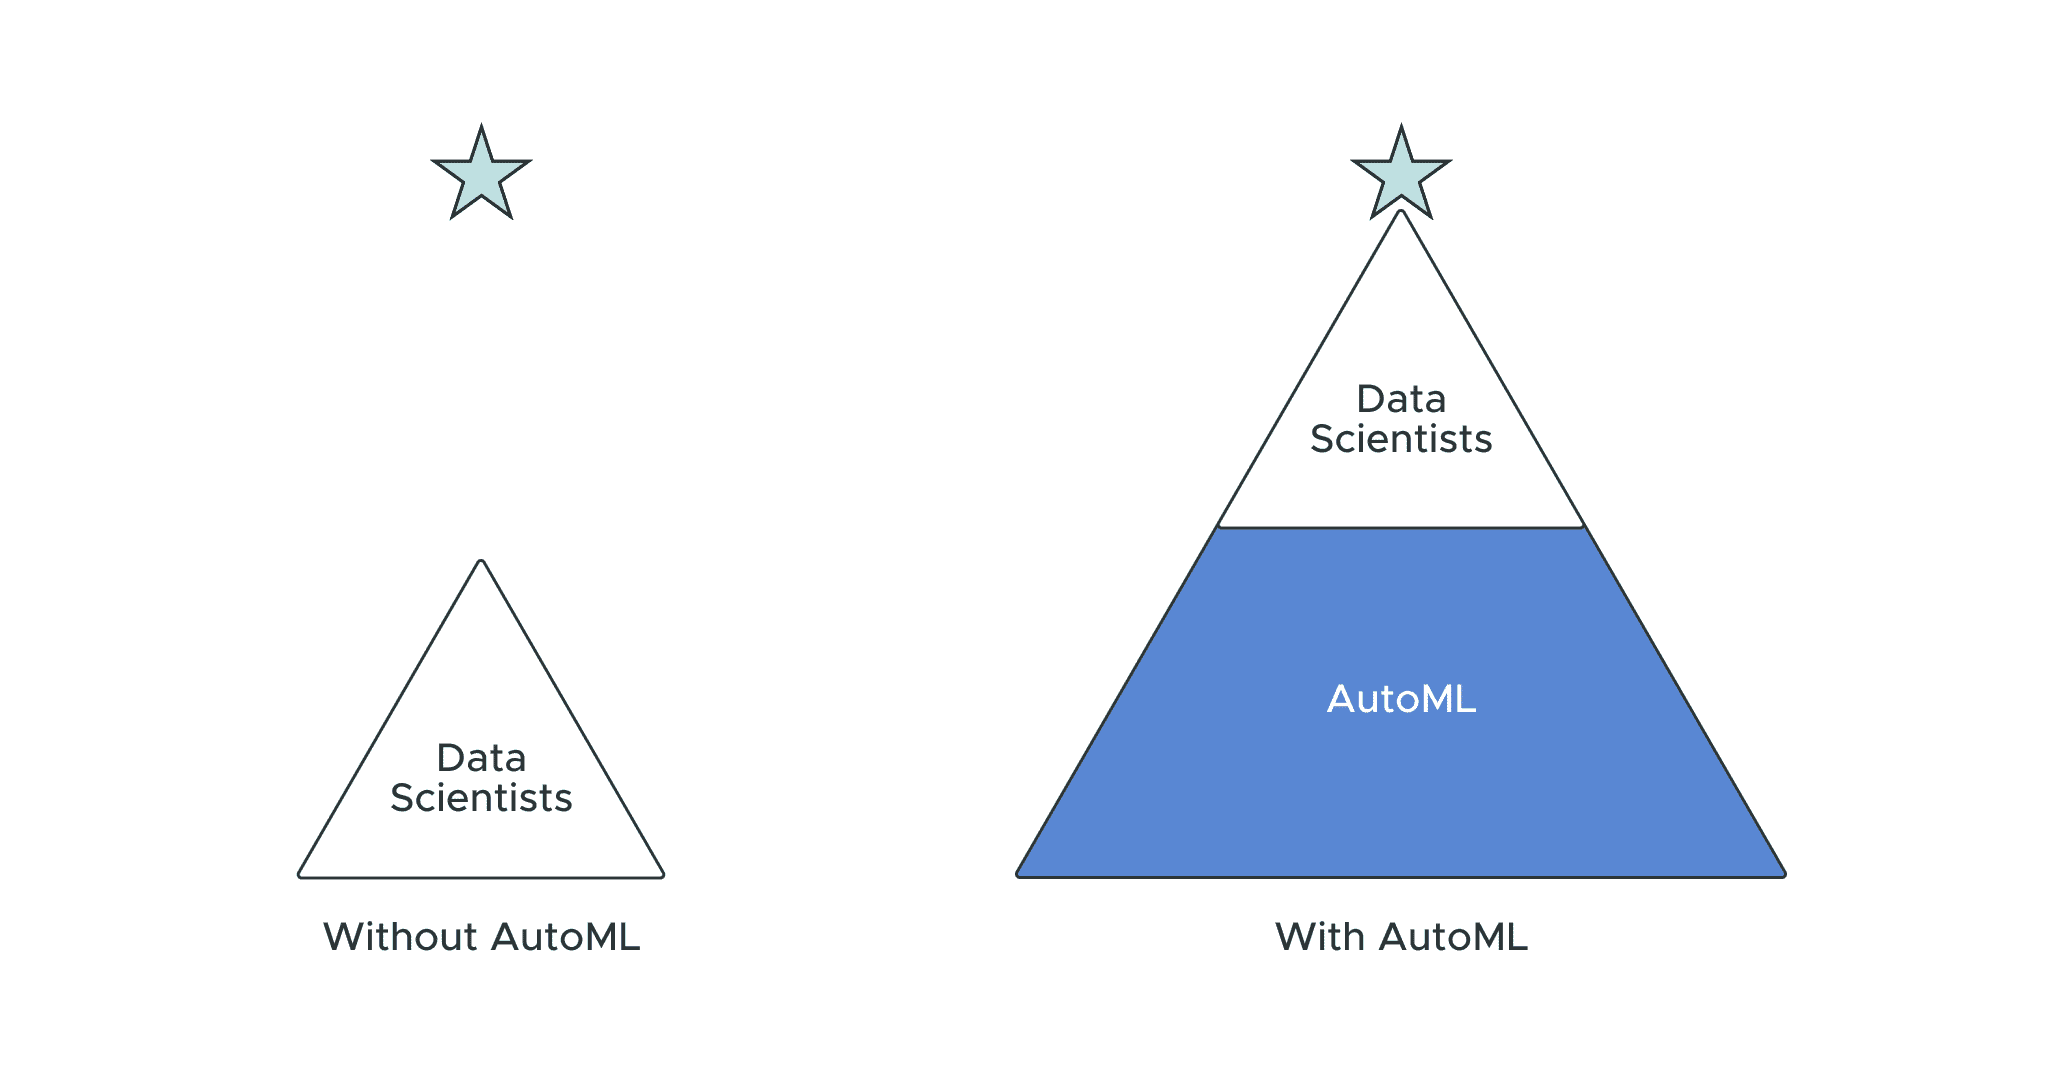 How to Use AutoML Tools to Scale ML, with Caution